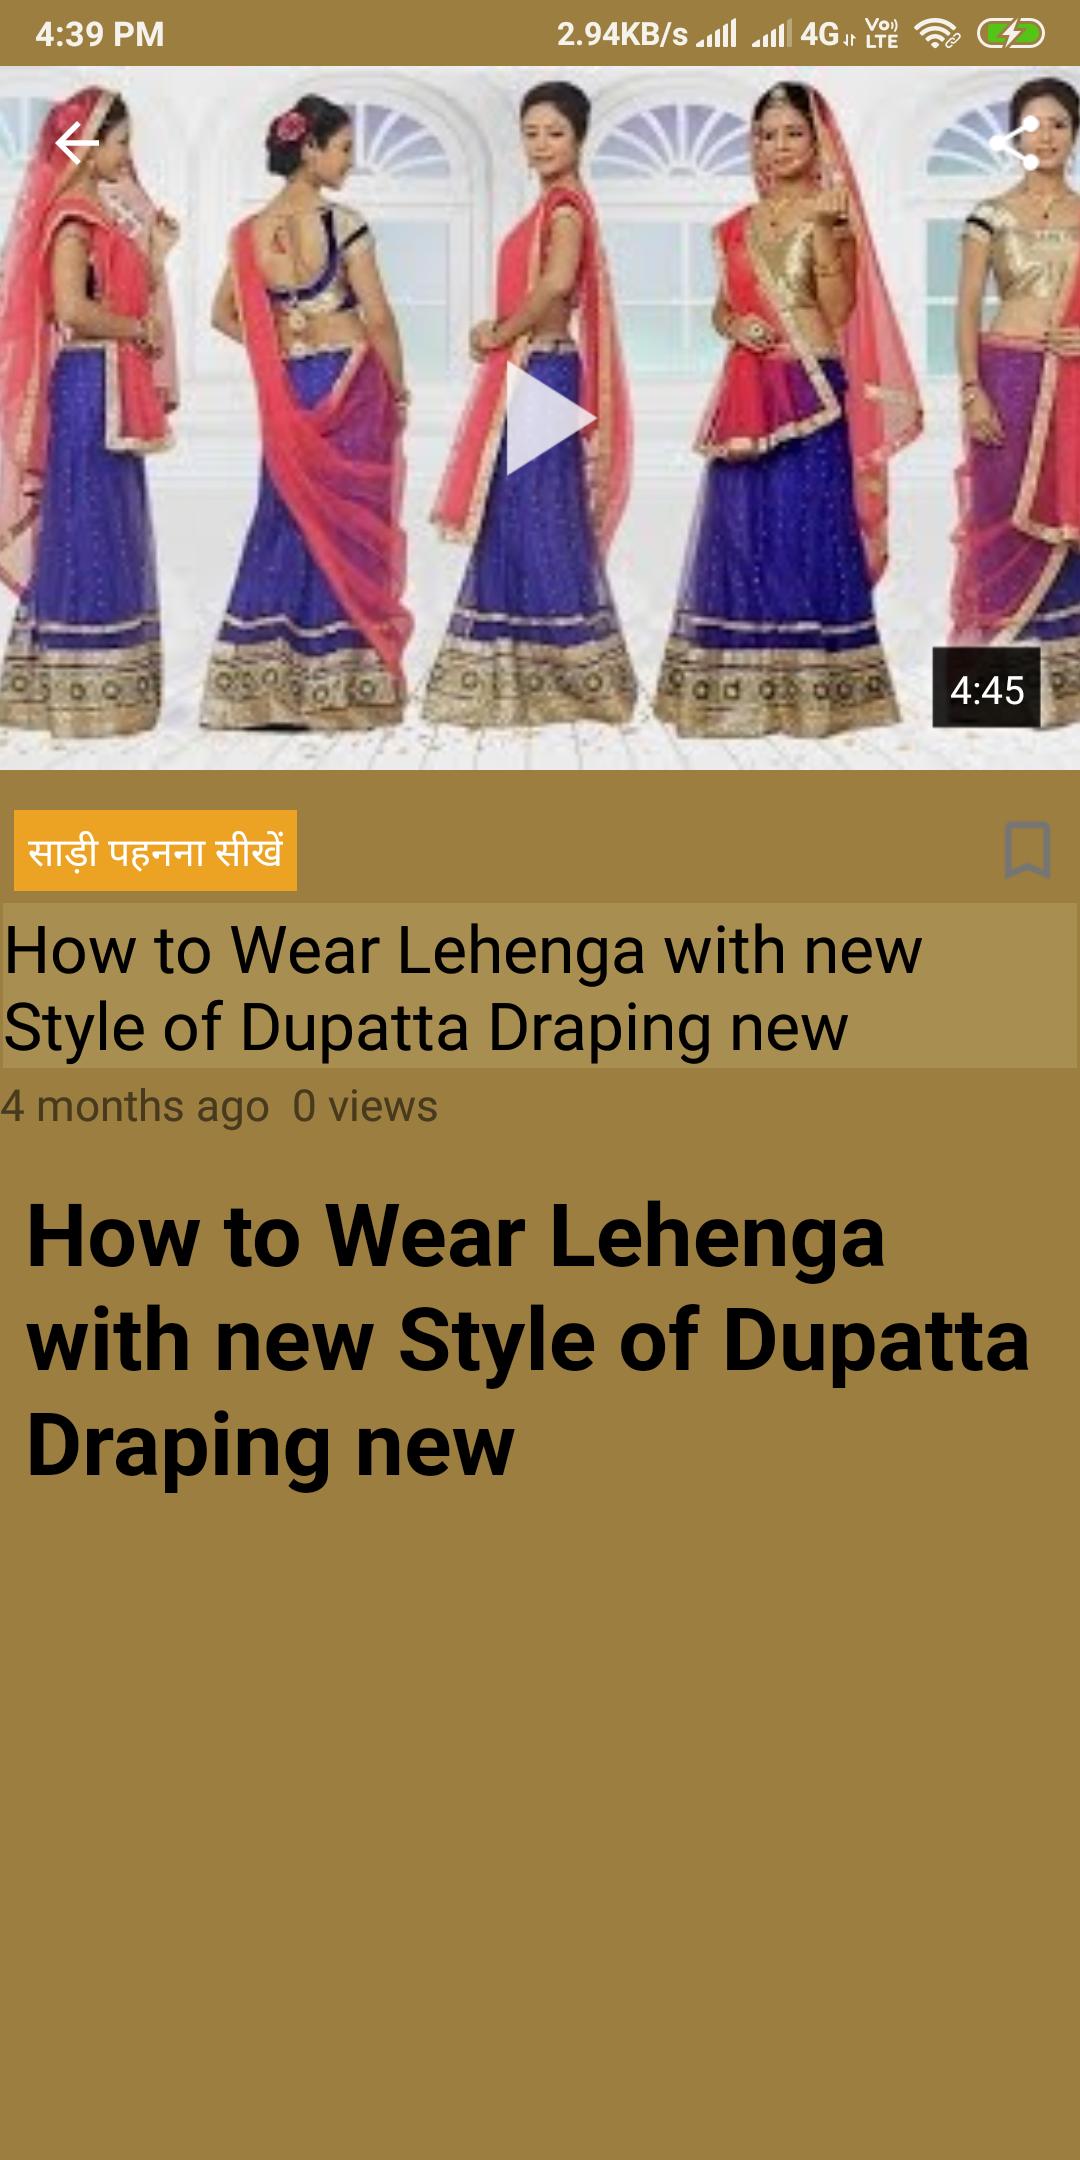 How to Wear Lehenga with new Style of Dupatta Draping